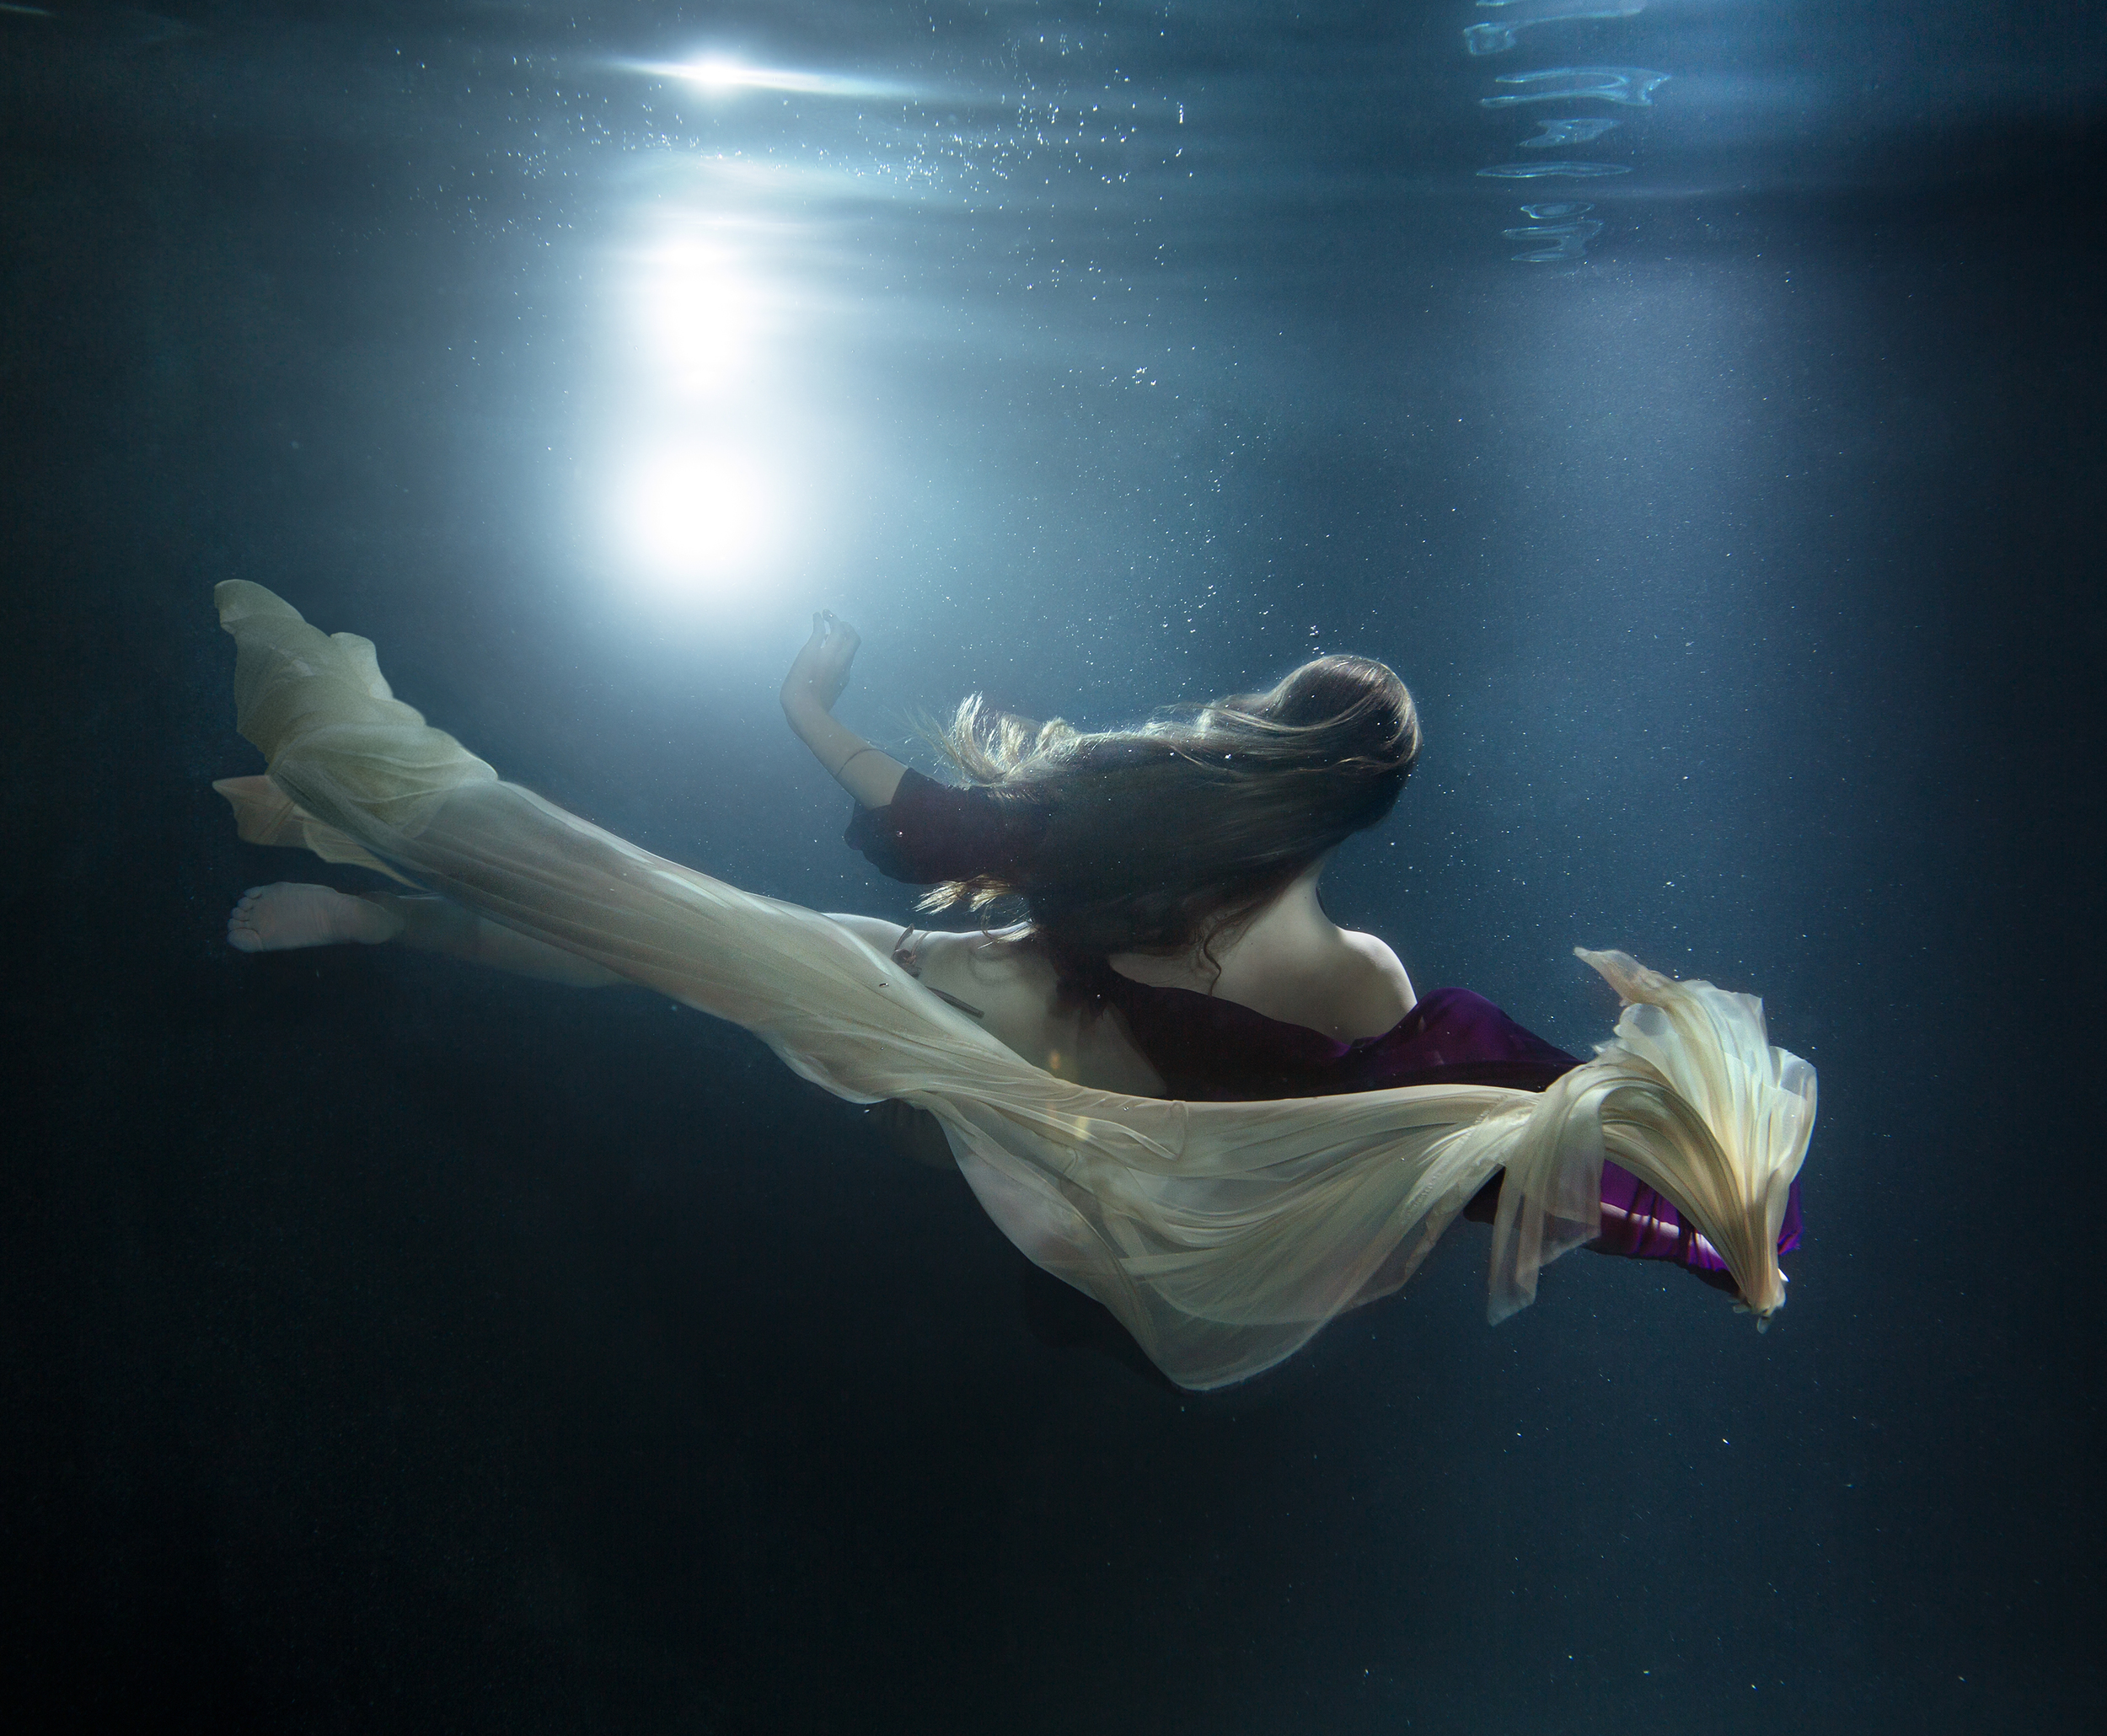 Underwater Hair, Fashion and Beauty Images edited @ Thomas Canny Studio.jpg